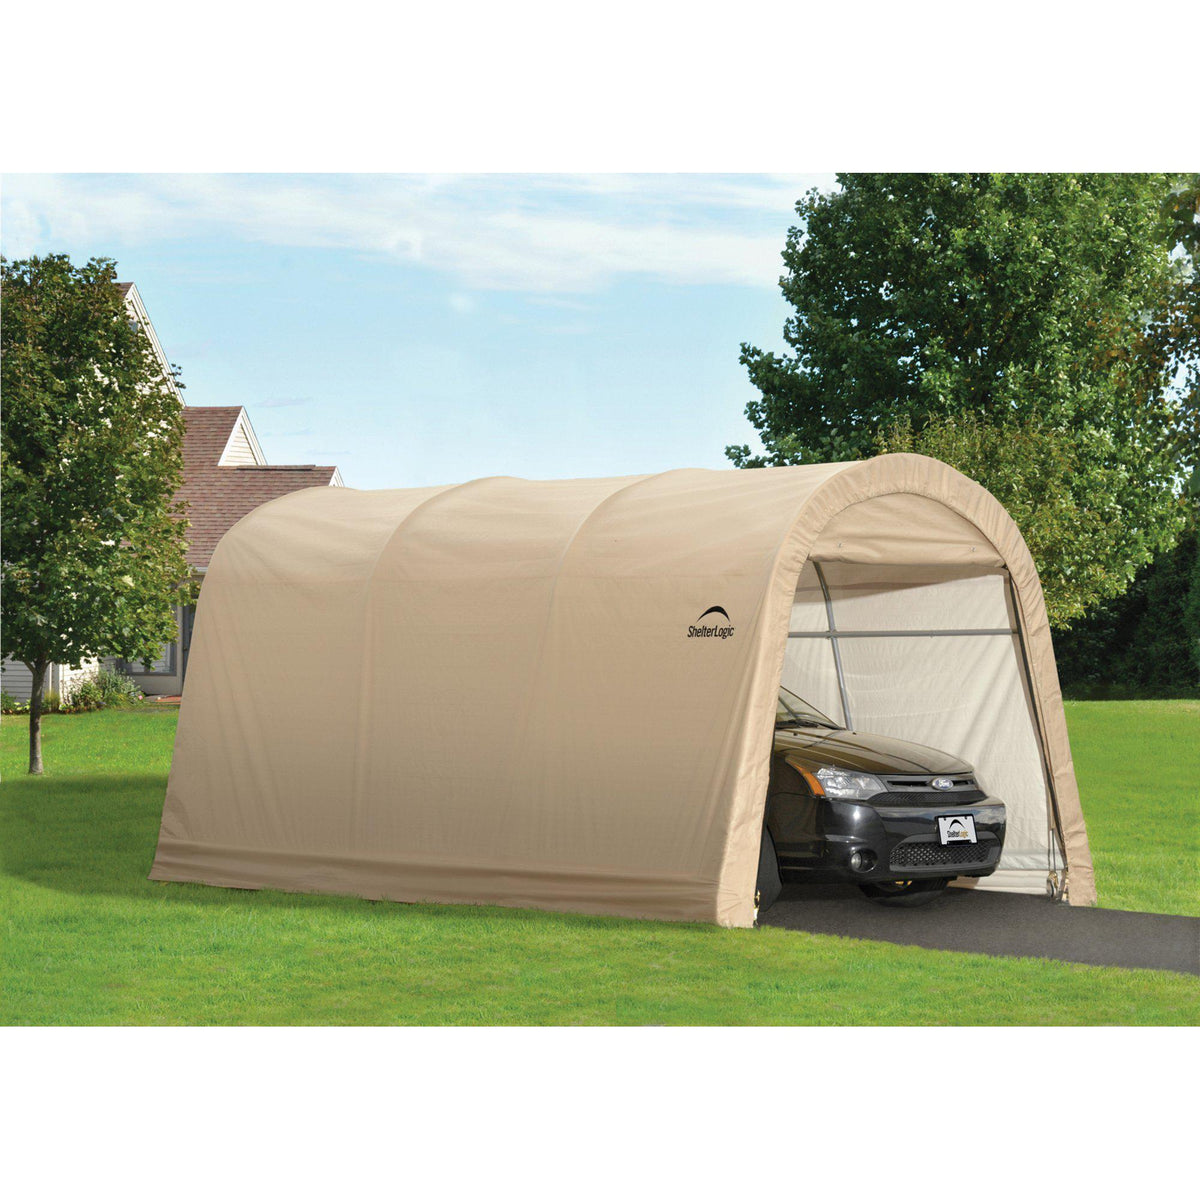 ShelterLogic 10' x 15' x 8' All-Steel Metal Frame Round Style Roof Instant Garage and AutoShelter with Waterproof and UV-Treated Ripstop Cover